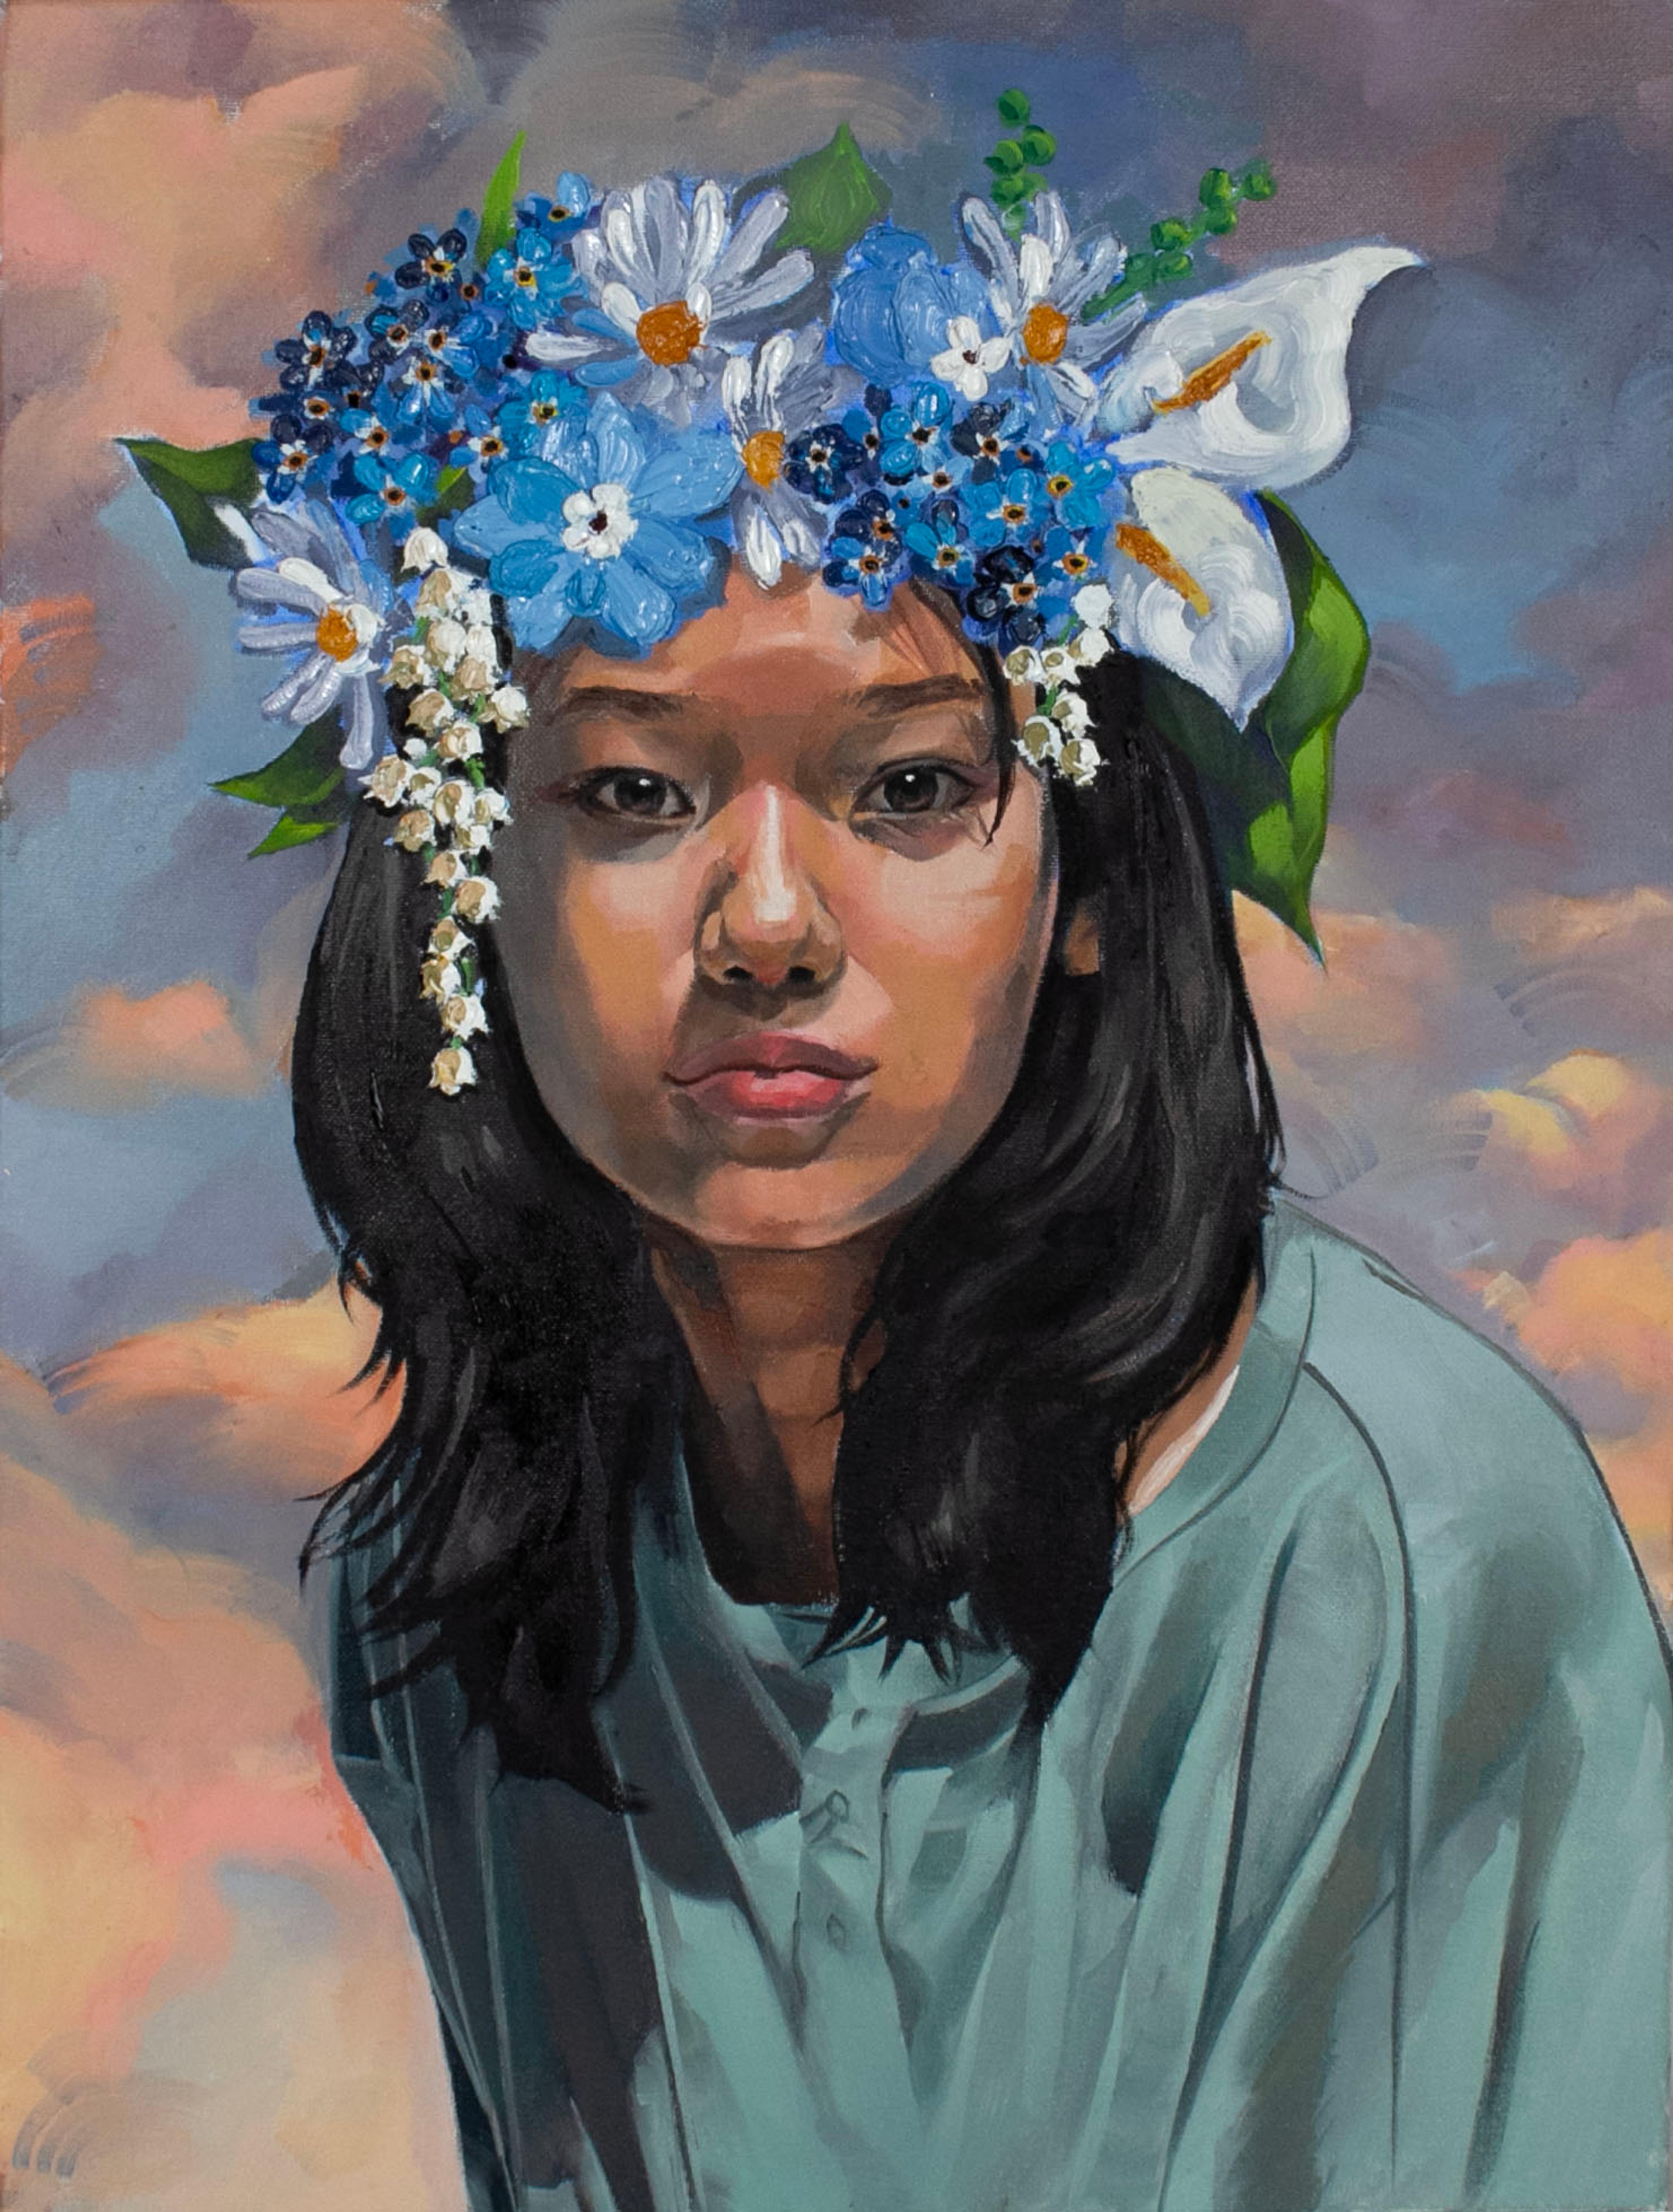 Oil-on-canvas painting of an adolescent girl leaning forward and facing the viewer directly, in front of blue and orange clouds. The girl has dark eyes, long black hair past her shoulders, and wears a decorative wreath with numerous blue and white flowers and green leaves on top of her head.  The girl wears a gray-teal shirt, and has a neutral expression on her face.